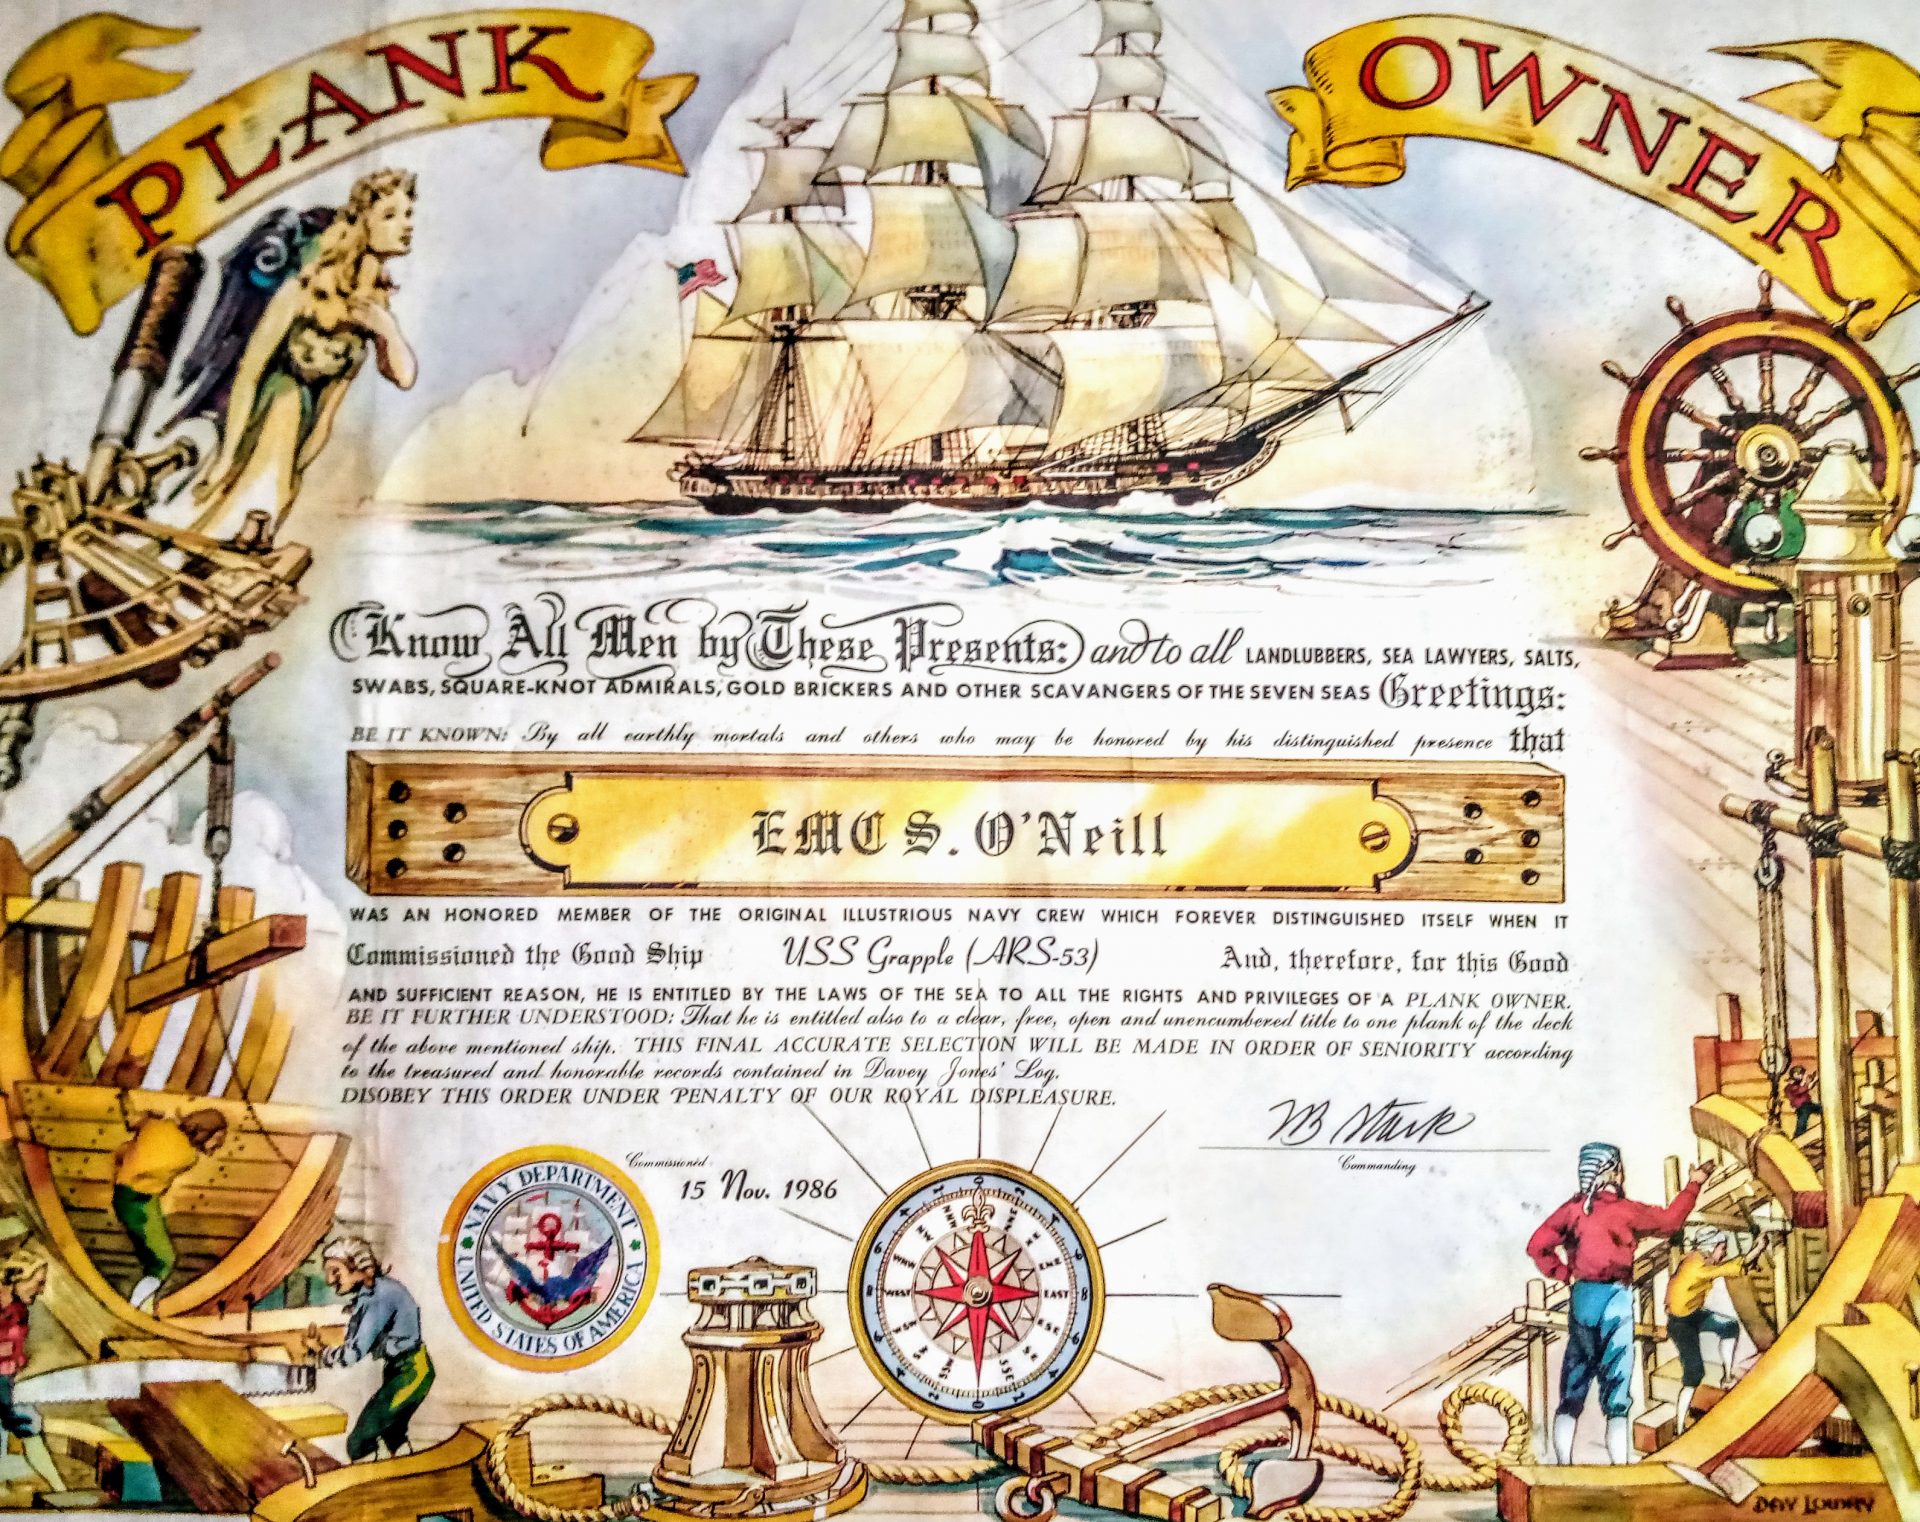 My father was what the Navy calls a Plank Owner, meaning he was a member of a ship's first crew. It is a big deal to help commission a Navy vessel and I am pretty sure dad did it for at least two ships. This is his certificate for the U.S.S. Grapple. He spent weeks in Wisconsin, assisting in the submarine tender's launch. I went to visit and spent a week with dad in Sturgeon Bay. It was a blast. I got to tour the ship, we went to a fish boil, we drove all around the peninsula and I got to see a part of the country I had never seen before. My father always ignited in me a deep curisorty about the world and a sense of adventure. I remember when I was a very young kid-7 or 8-dad had purchased a set encyclopedias for the house. I remember laying in the hallway and reading those books from cover to cover and later talking to dad about what I had discovered. Thank you, dad, for all your inspiration.